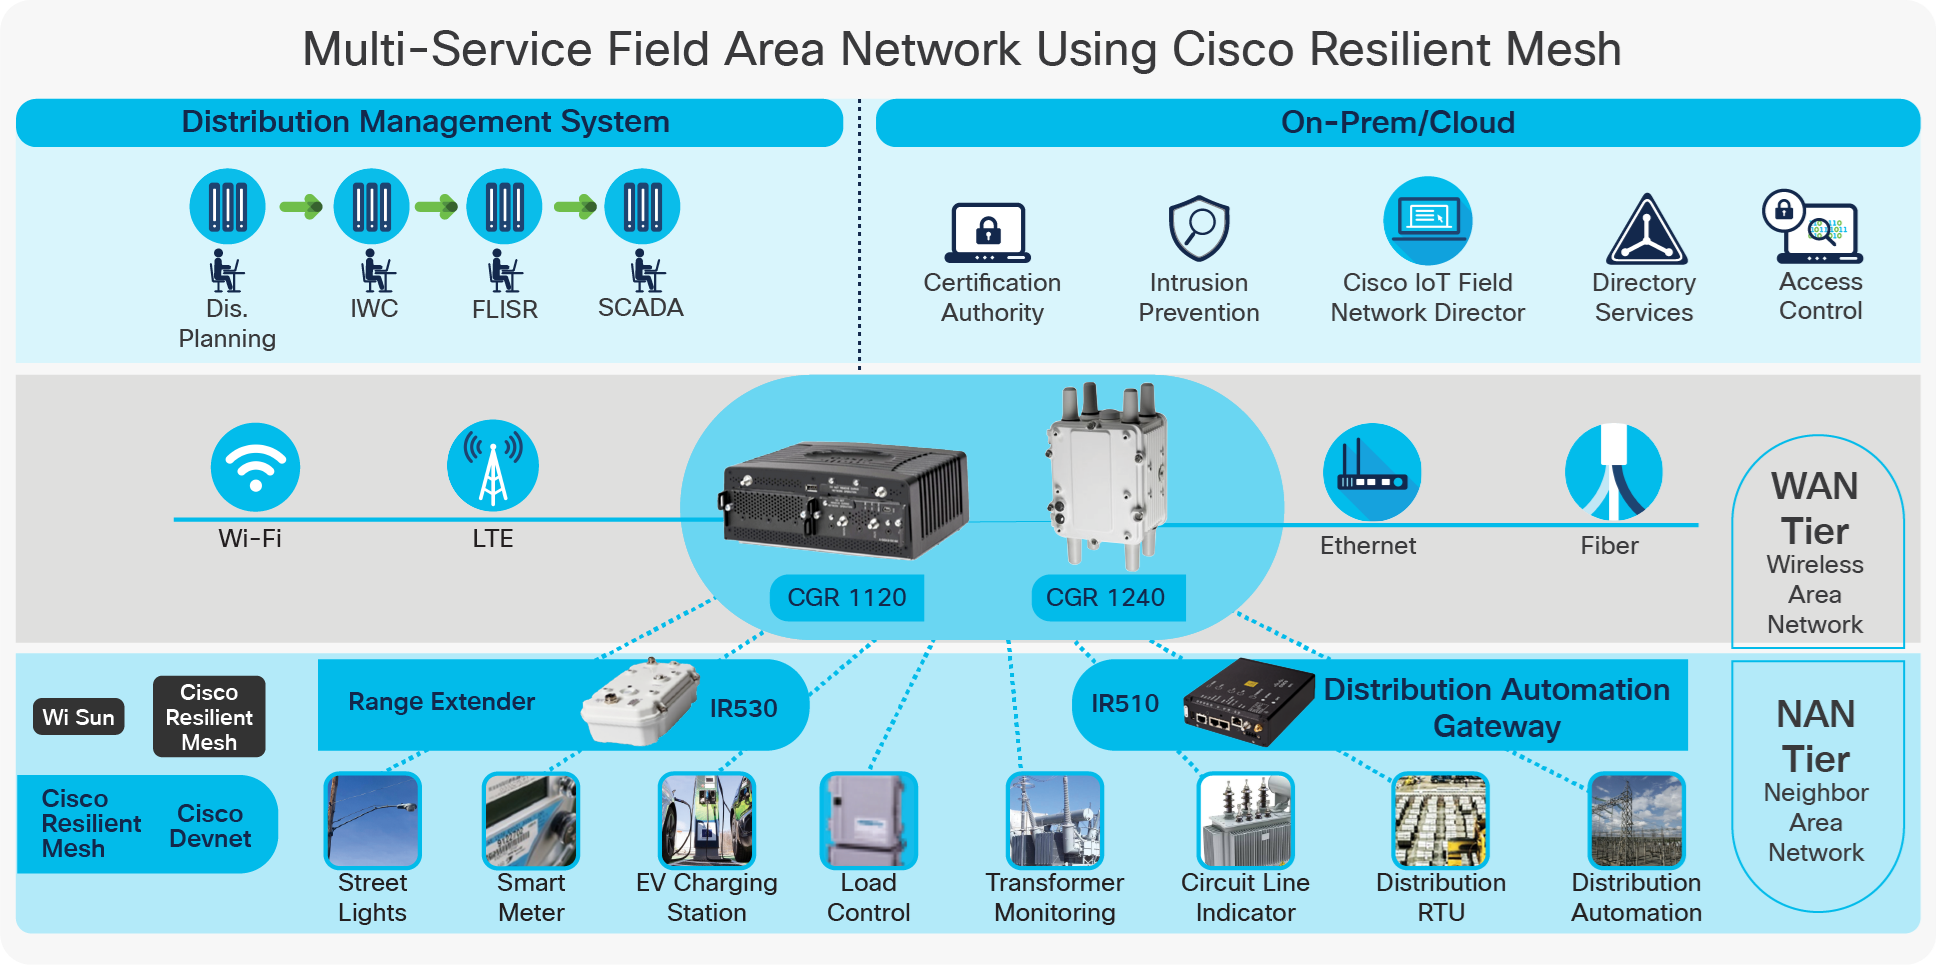 Cisco Connected Grid FAN solution